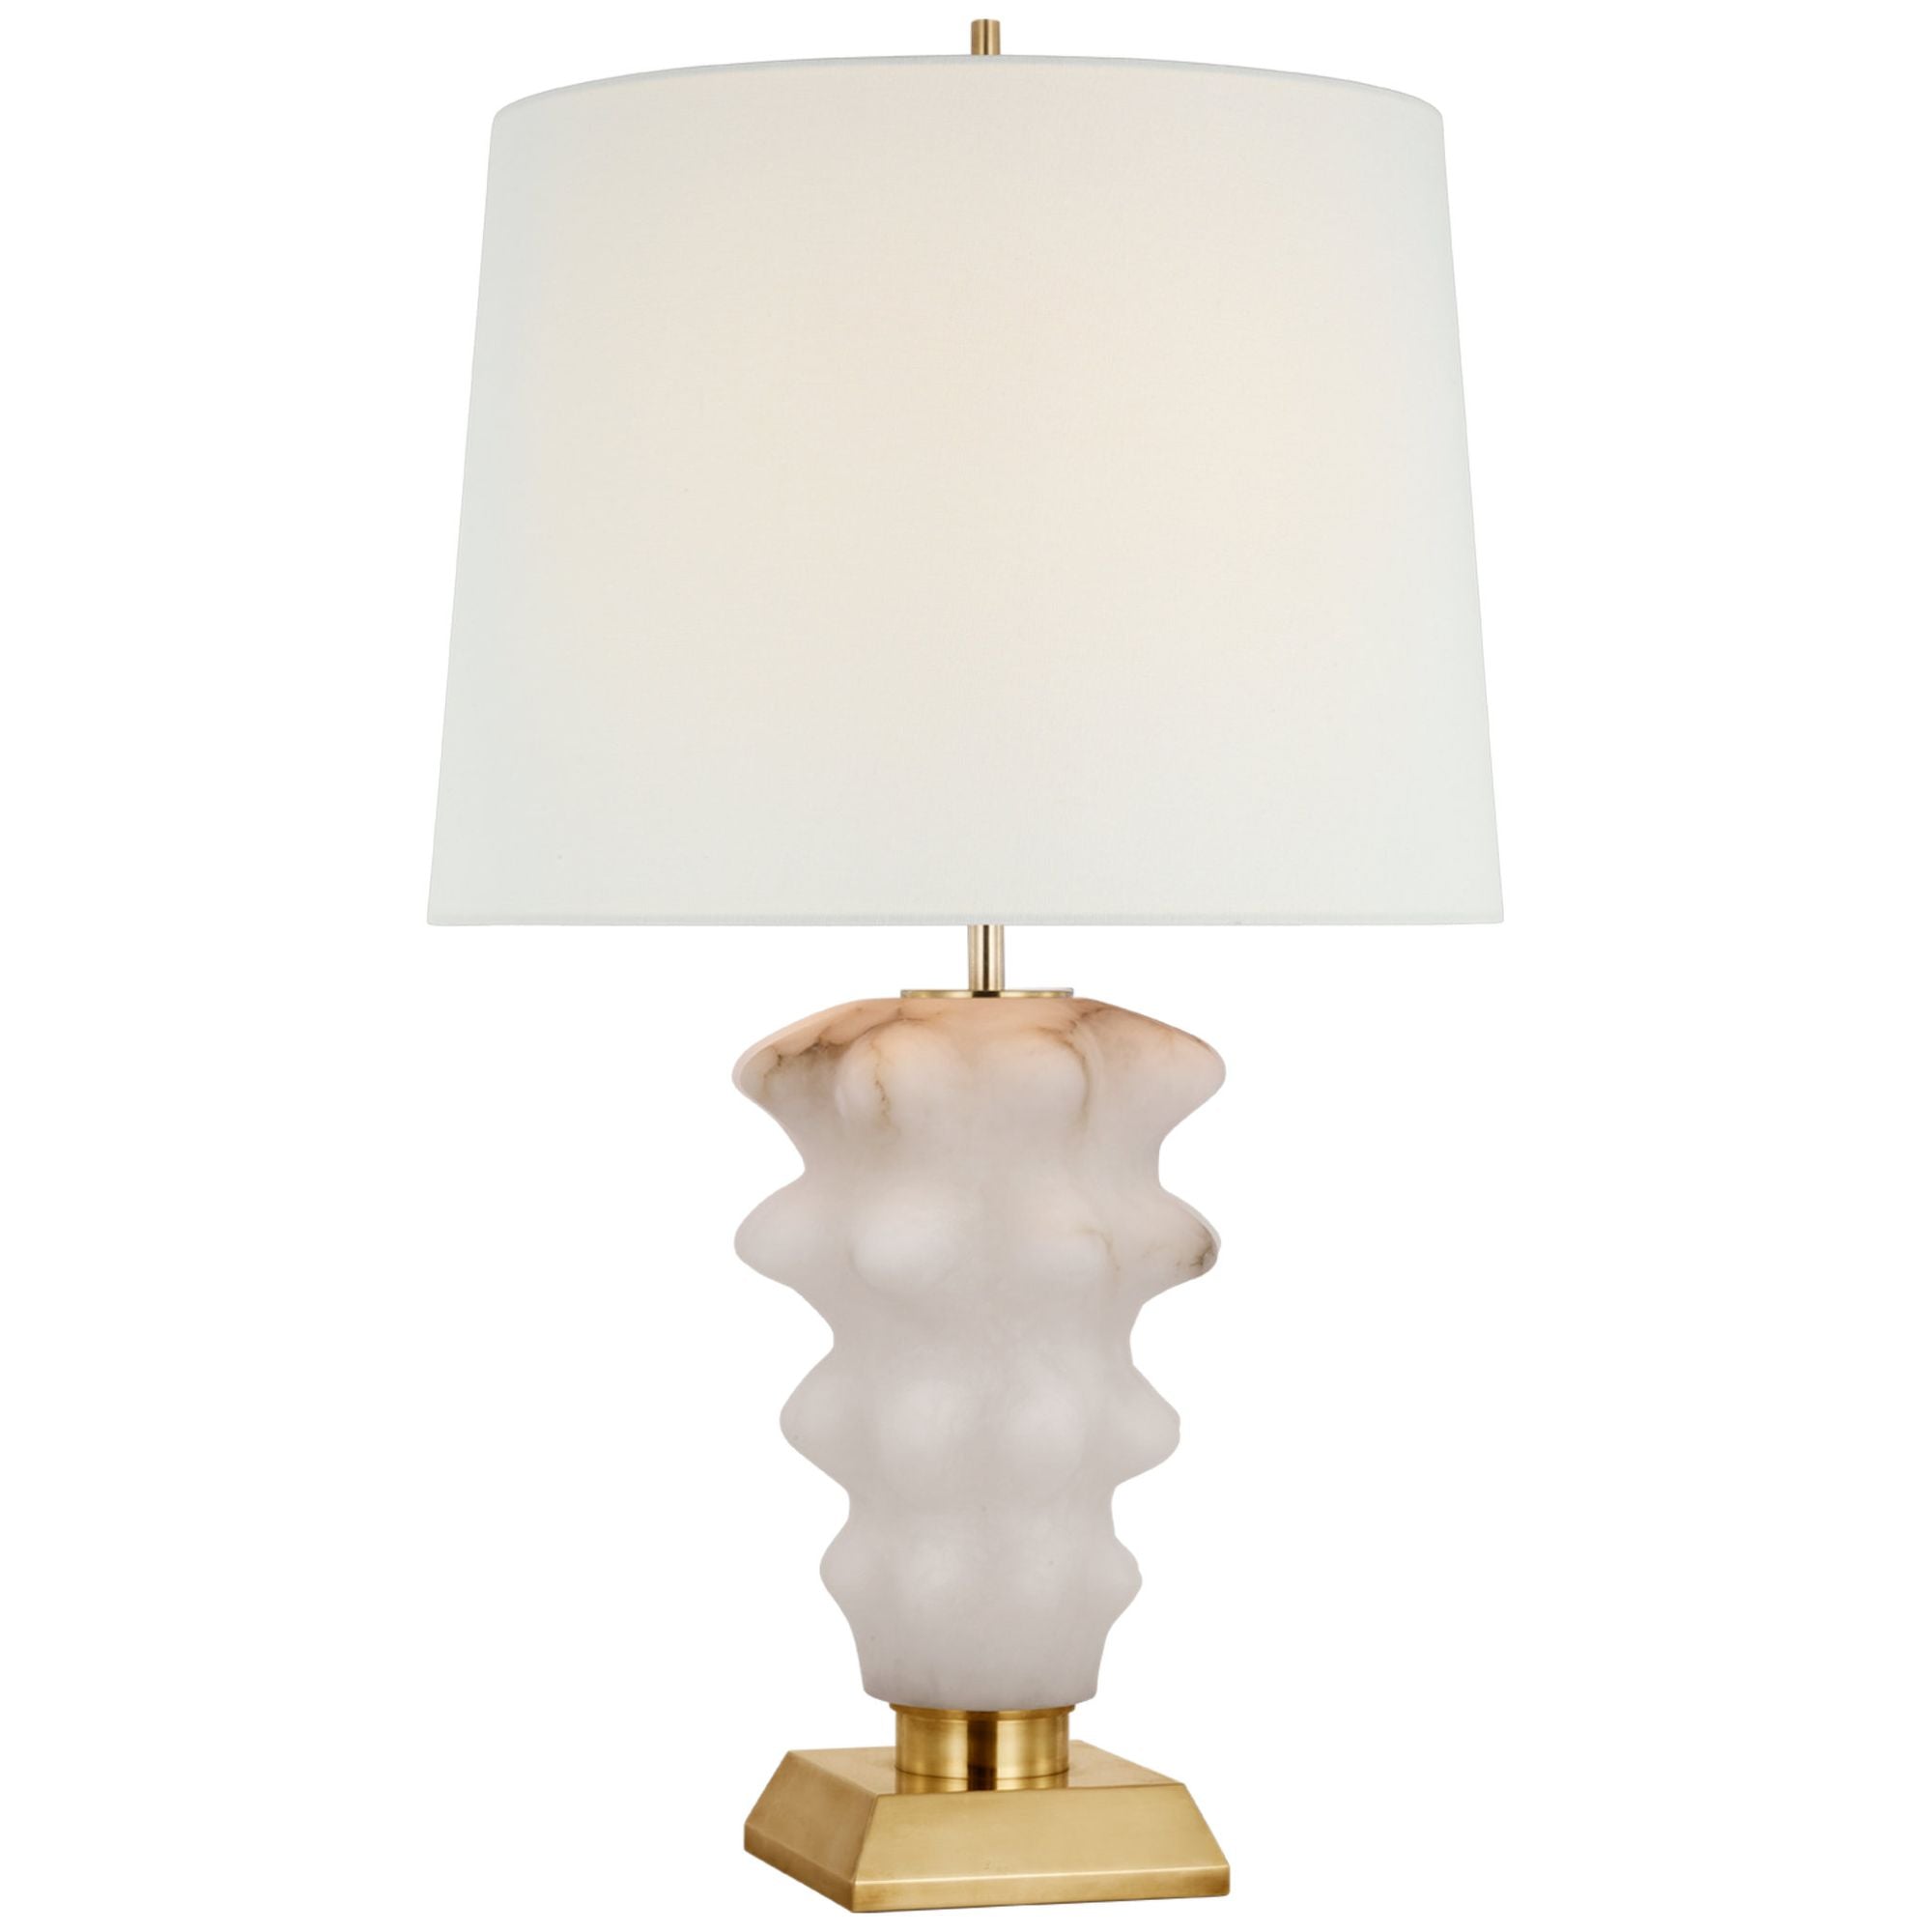 Thomas O'Brien Luxor Large Table Lamp in Alabaster and Hand-Rubbed Antique Brass with Linen Shade